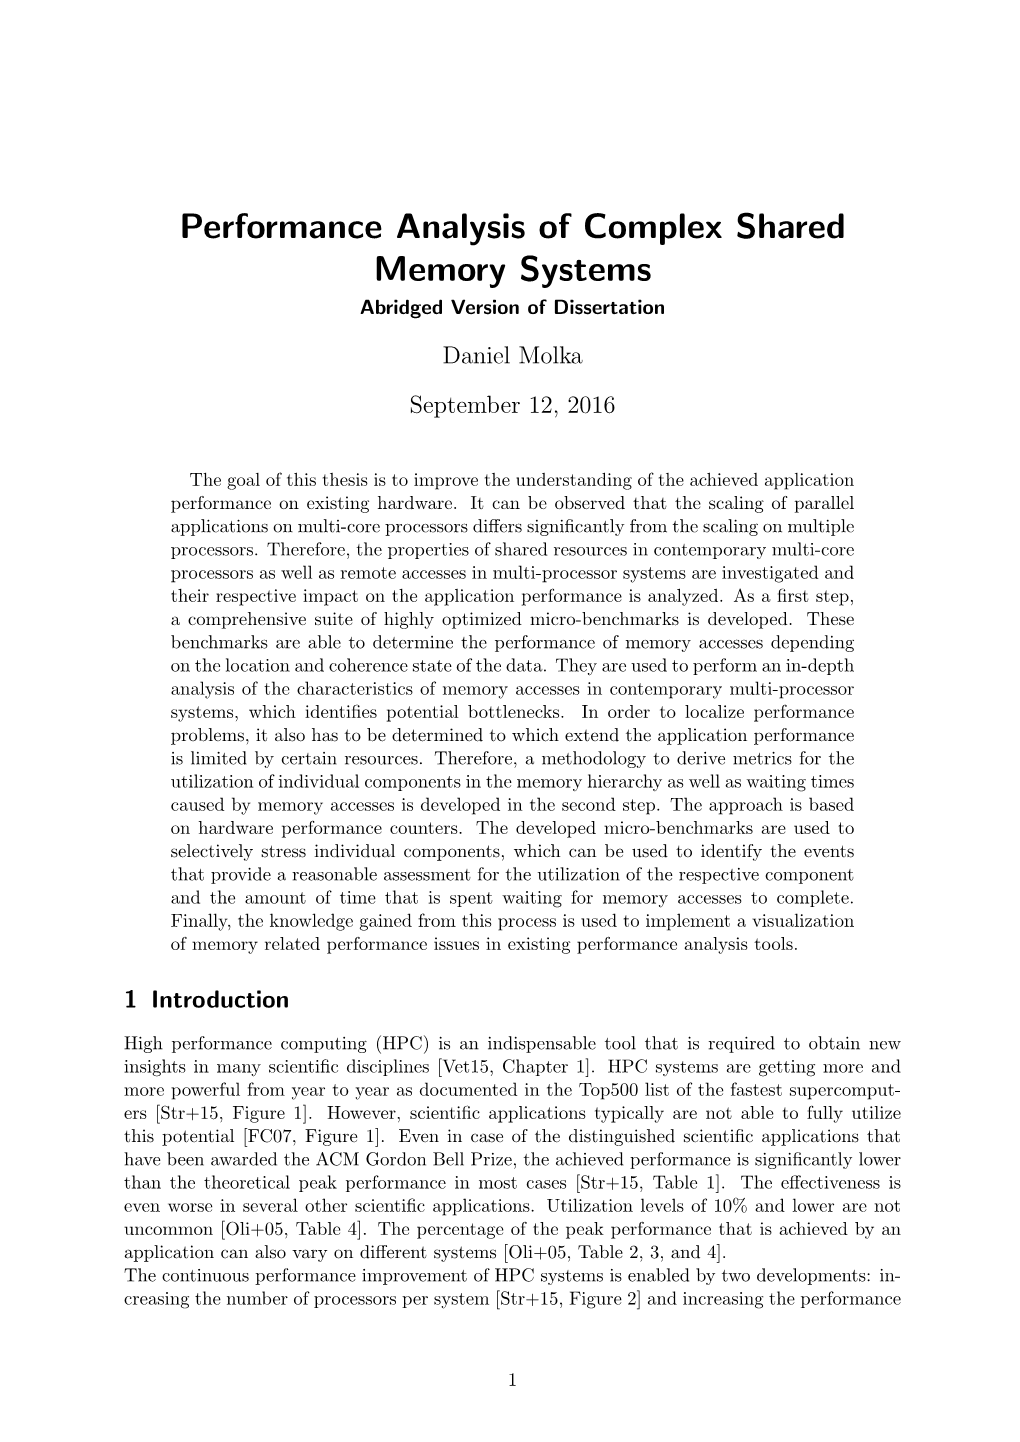 Performance Analysis of Complex Shared Memory Systems Abridged Version of Dissertation